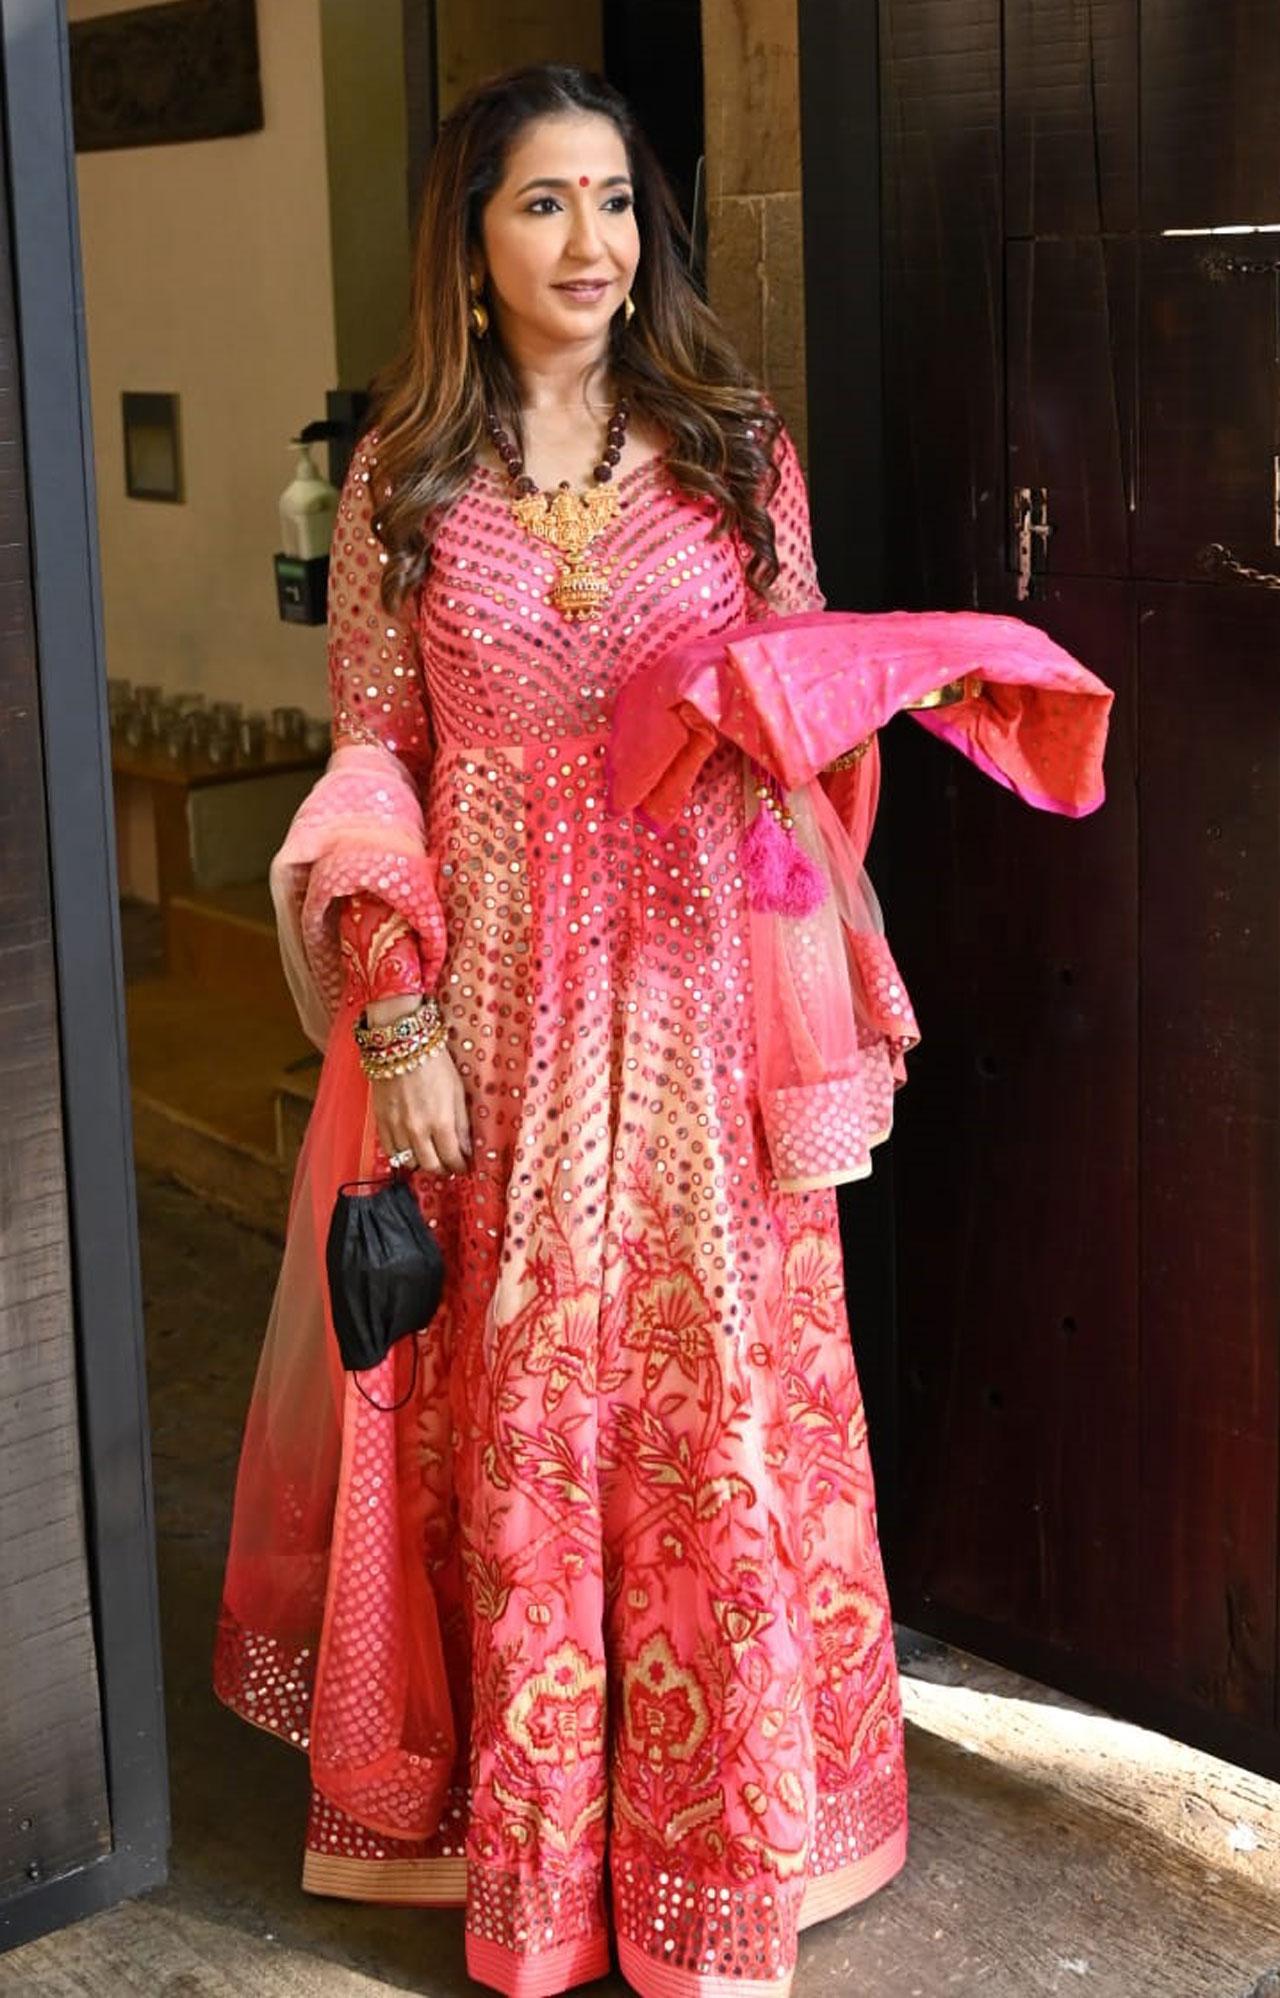 Krishika Lulla too joined the celebrations dressed for the occasion to the T.